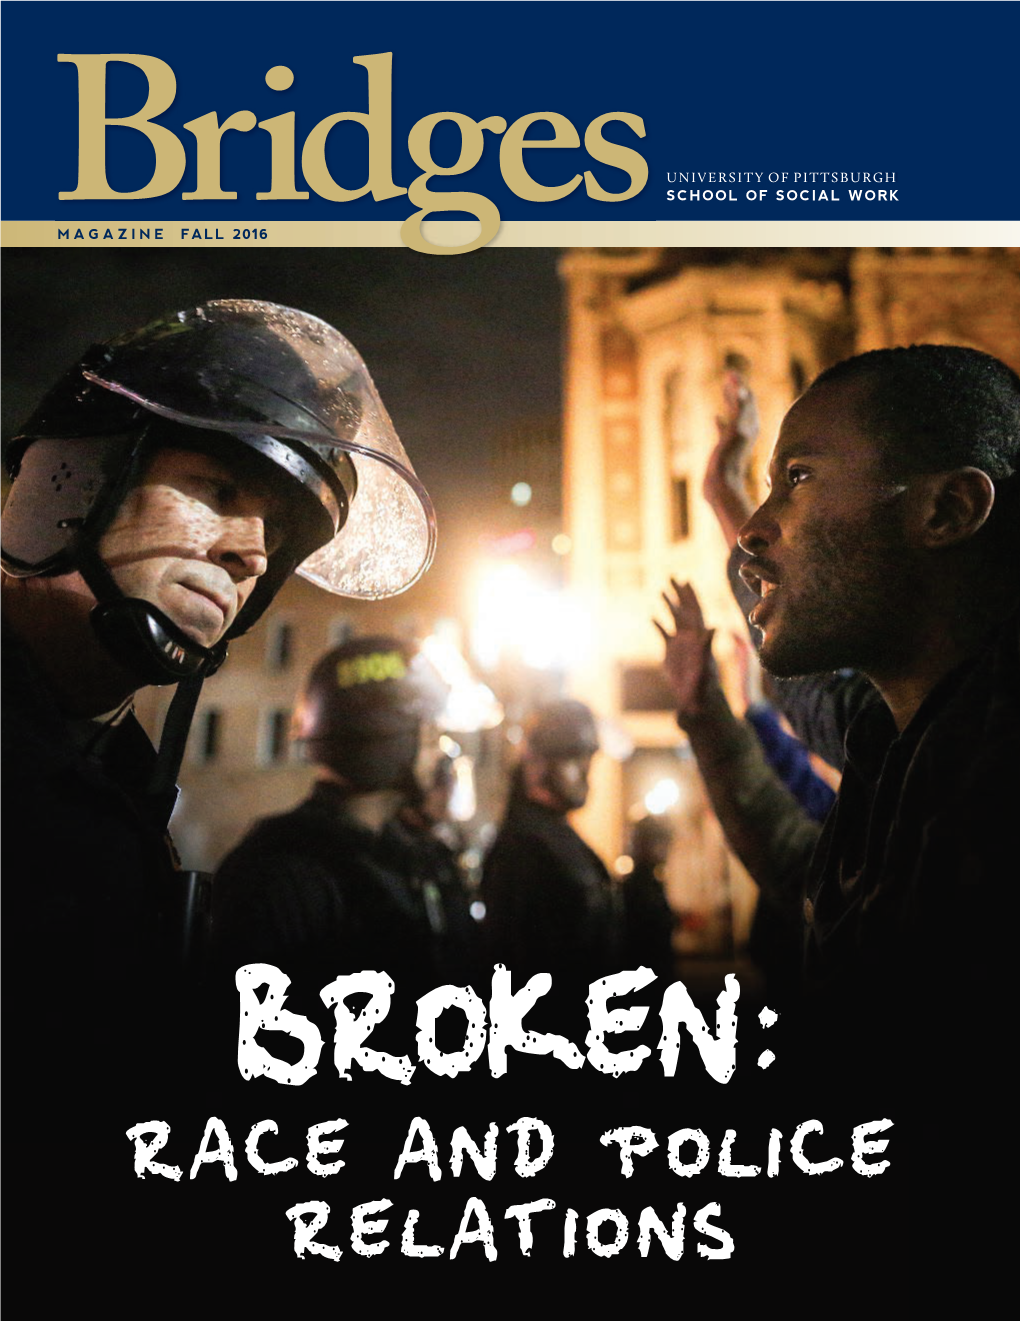 RACE and POLICE RELATIONS Bridges Bridges Is the University of Pittsburgh School of Social TABLE of CONTENTS Work Magazine